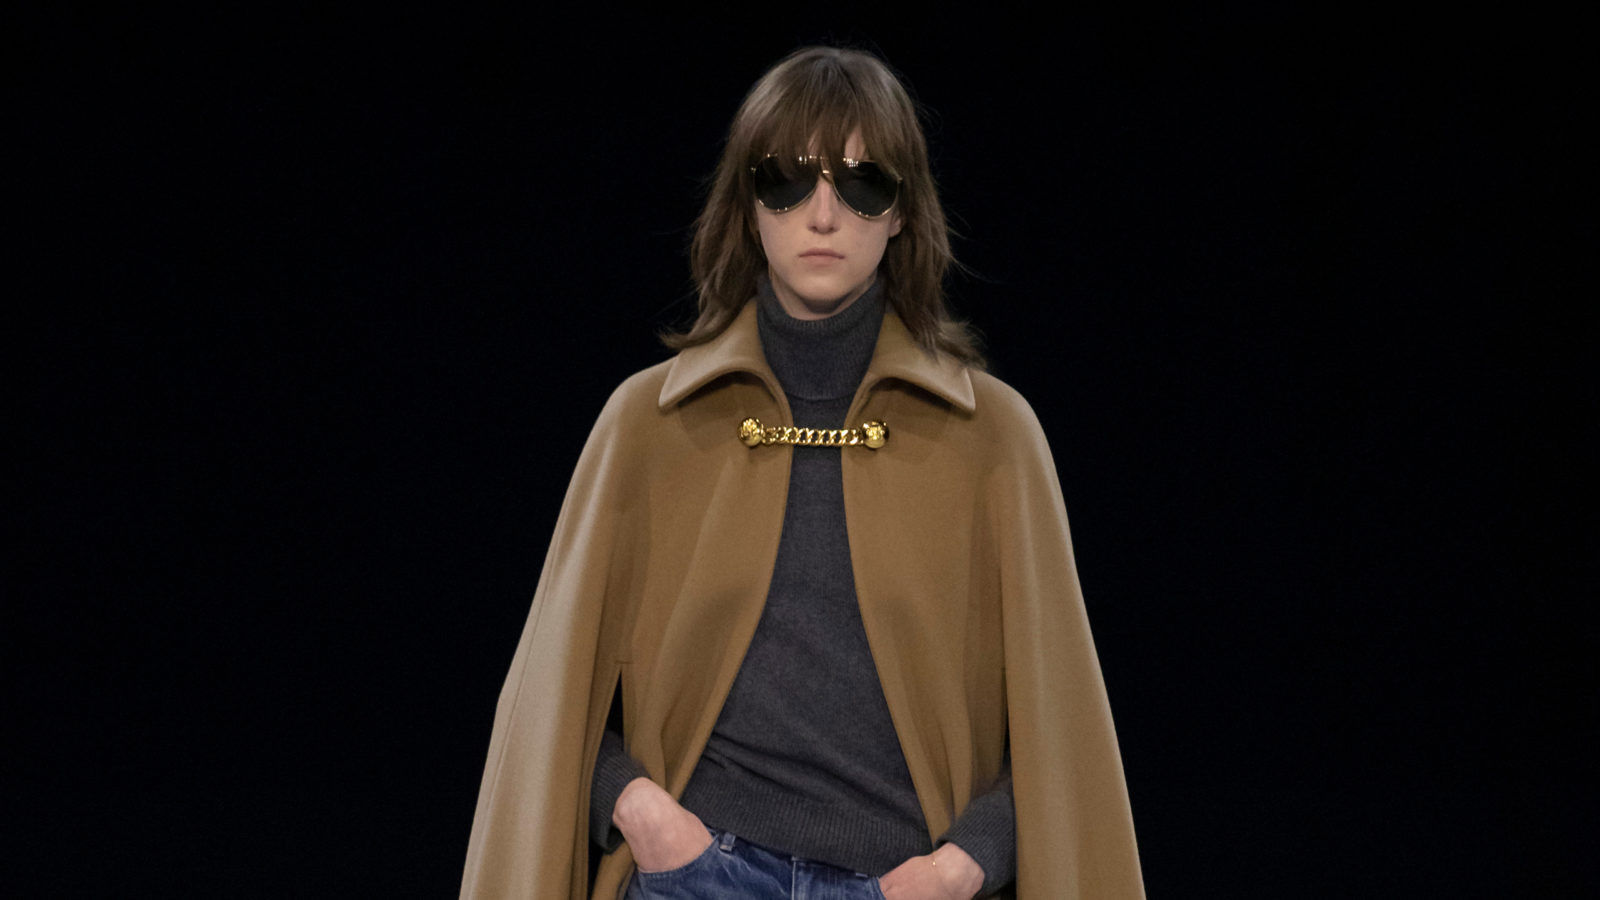 Trend: Capes are a new way to introduce dynamic silhouettes to your closet